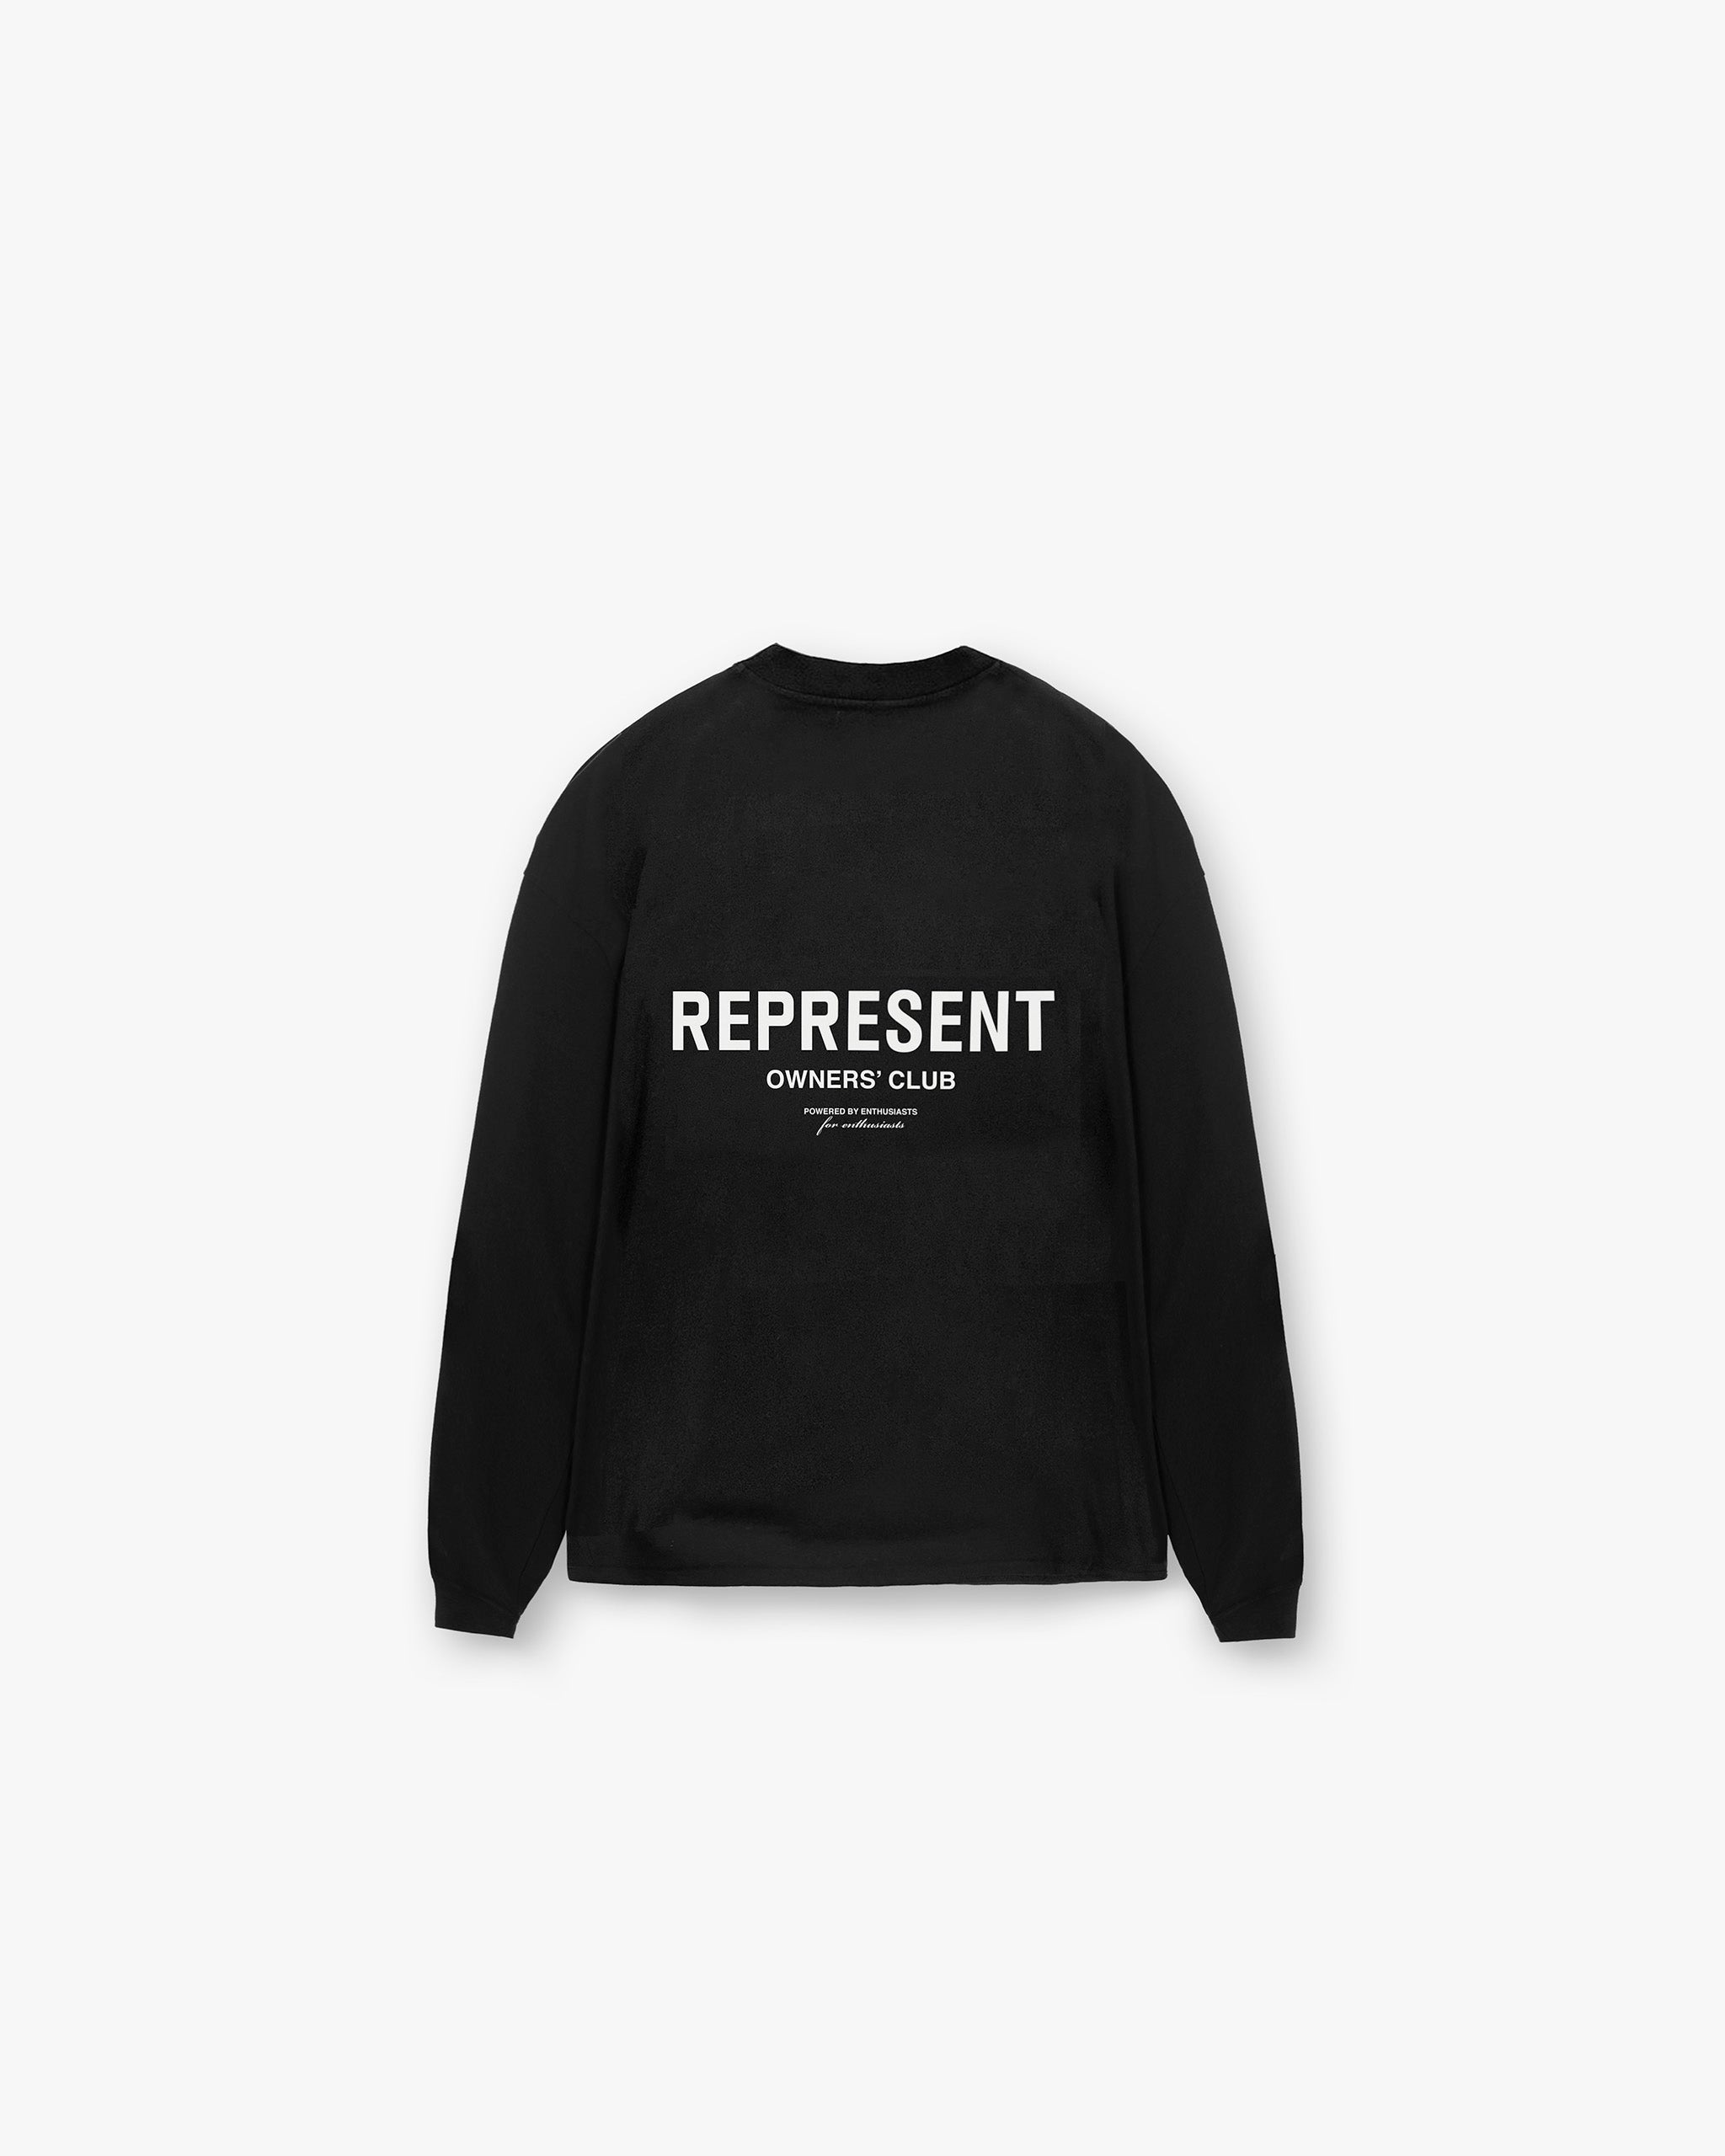 Represent Owners Club Long Sleeve T-Shirt | Black T-Shirts Owners Club | Represent Clo